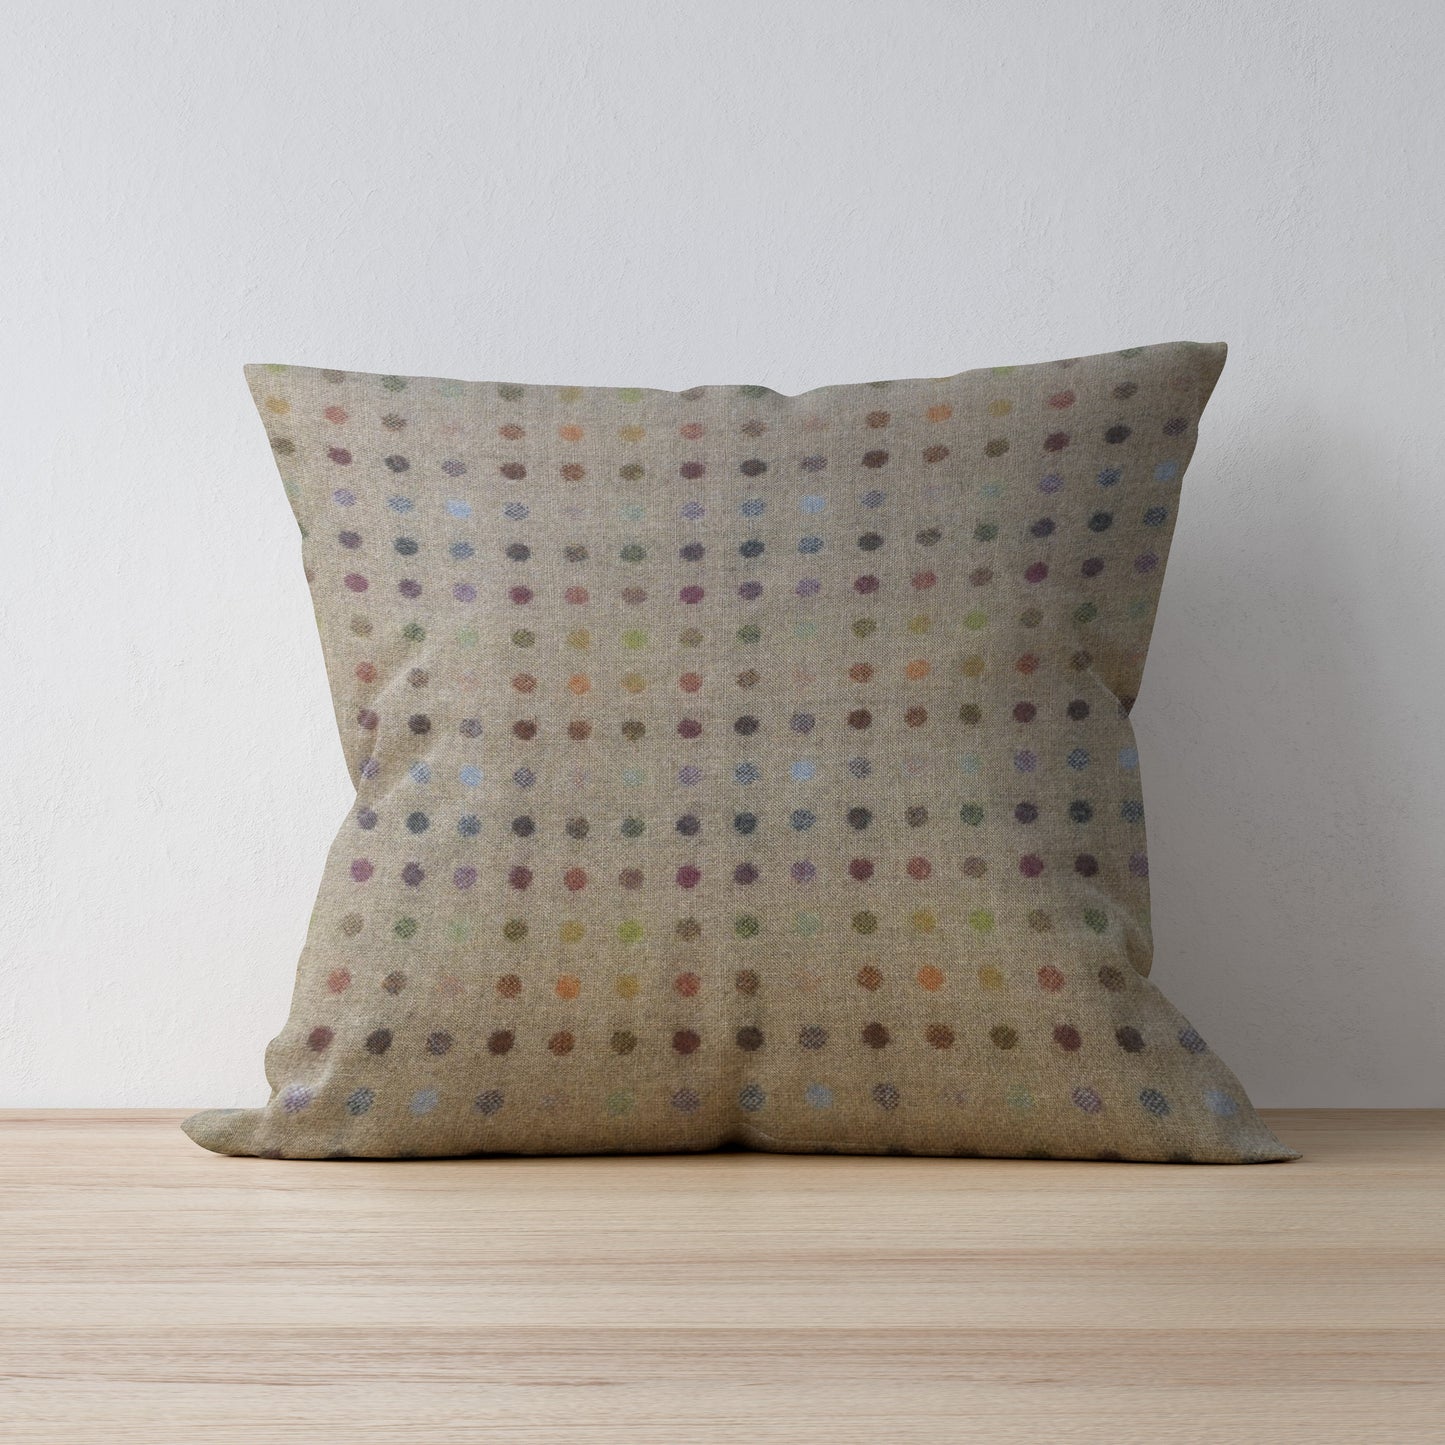 F&B - Abraham Moon Dales Collection Spot Cushion - Handmade in Yorkshire